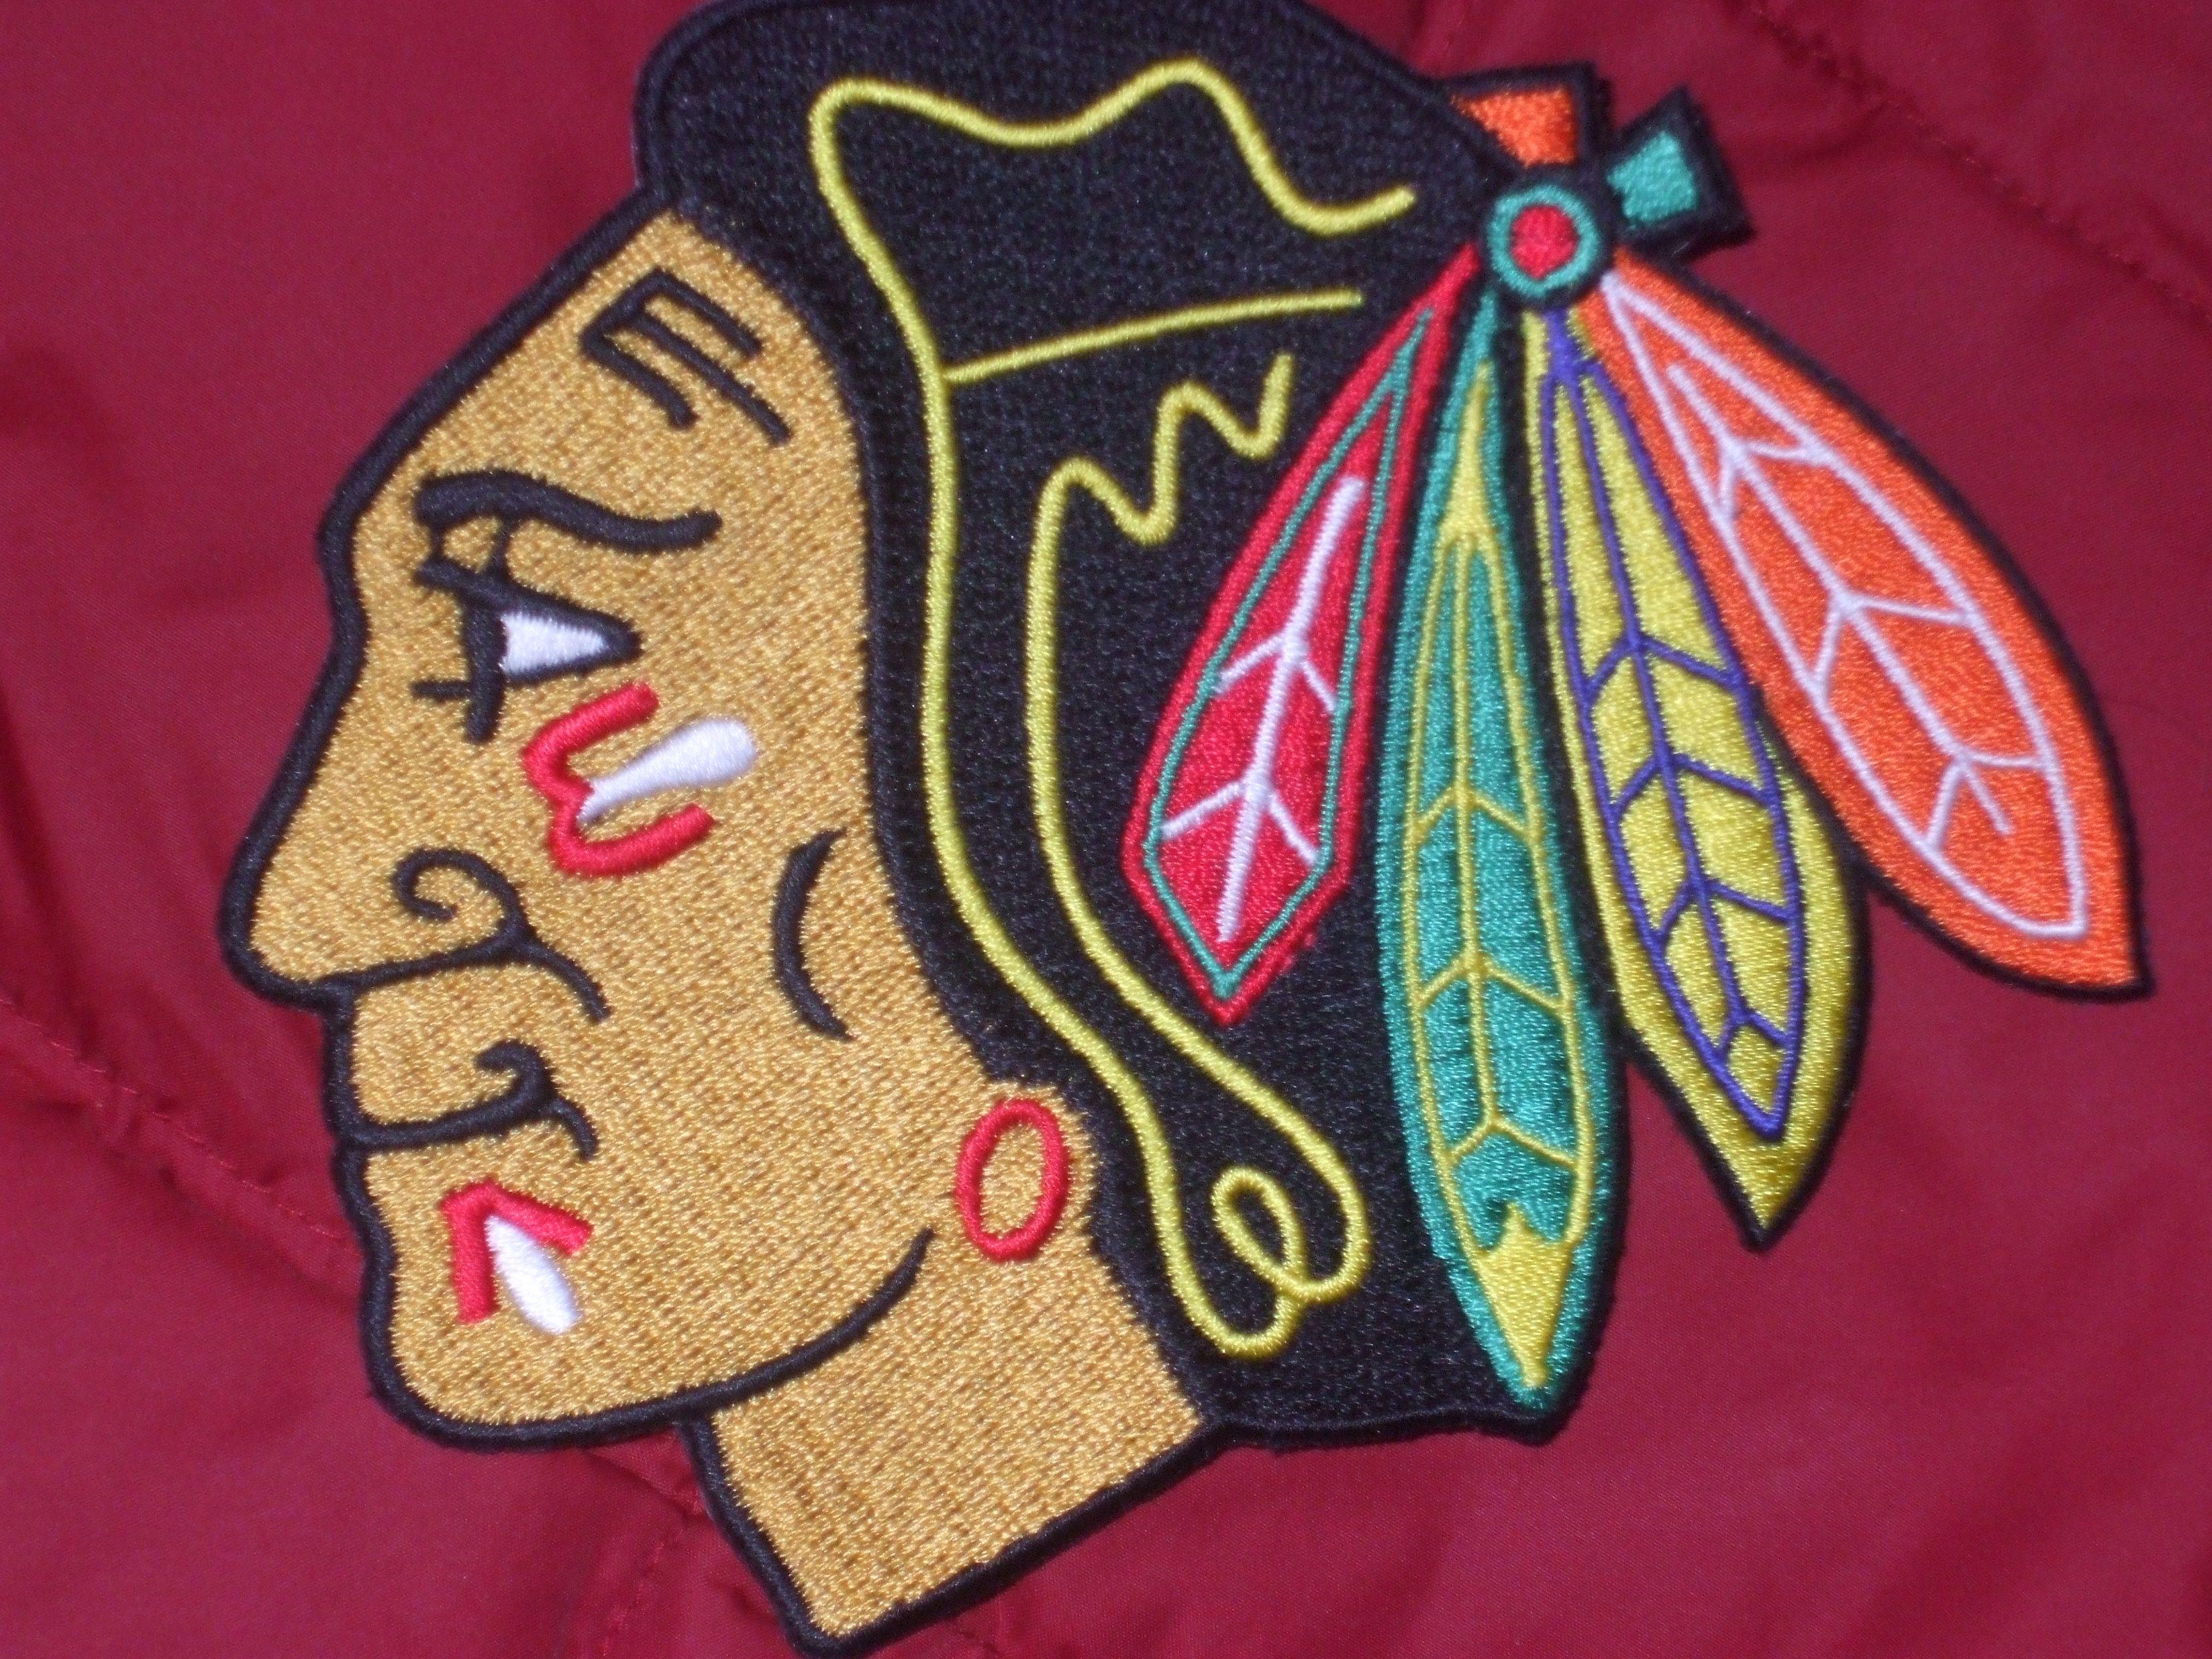 Indian Head Logo - Iconic Indian Head Logo Embroidered Patch of the Chicago Blackhawks ...